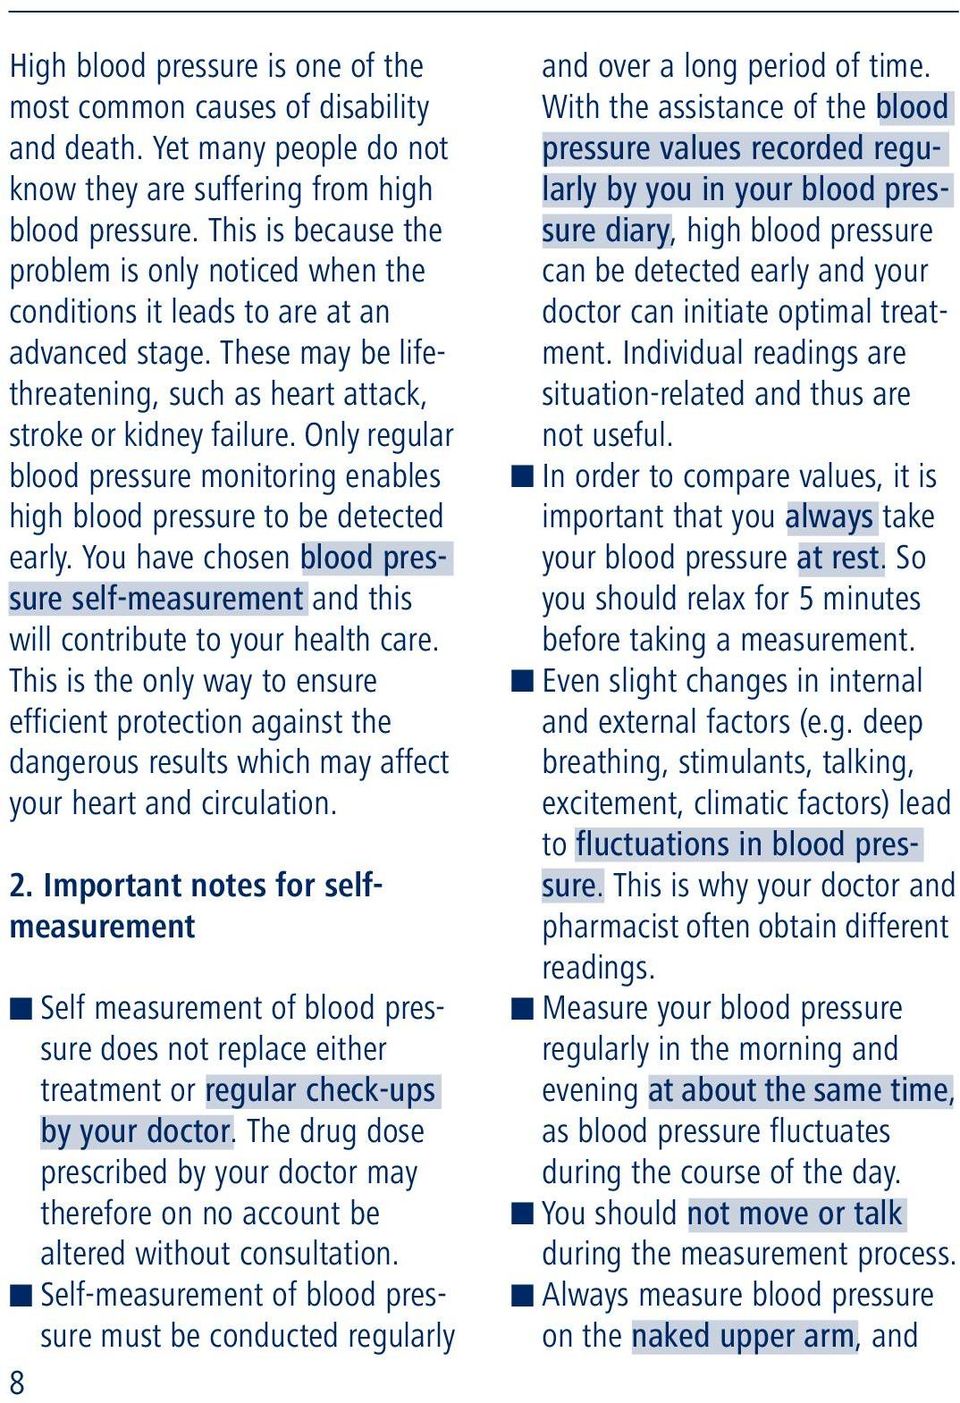 Only regular blood pressure monitoring enables high blood pressure to be detected early. You have chosen blood pressure self-measurement and this will contribute to your health care.